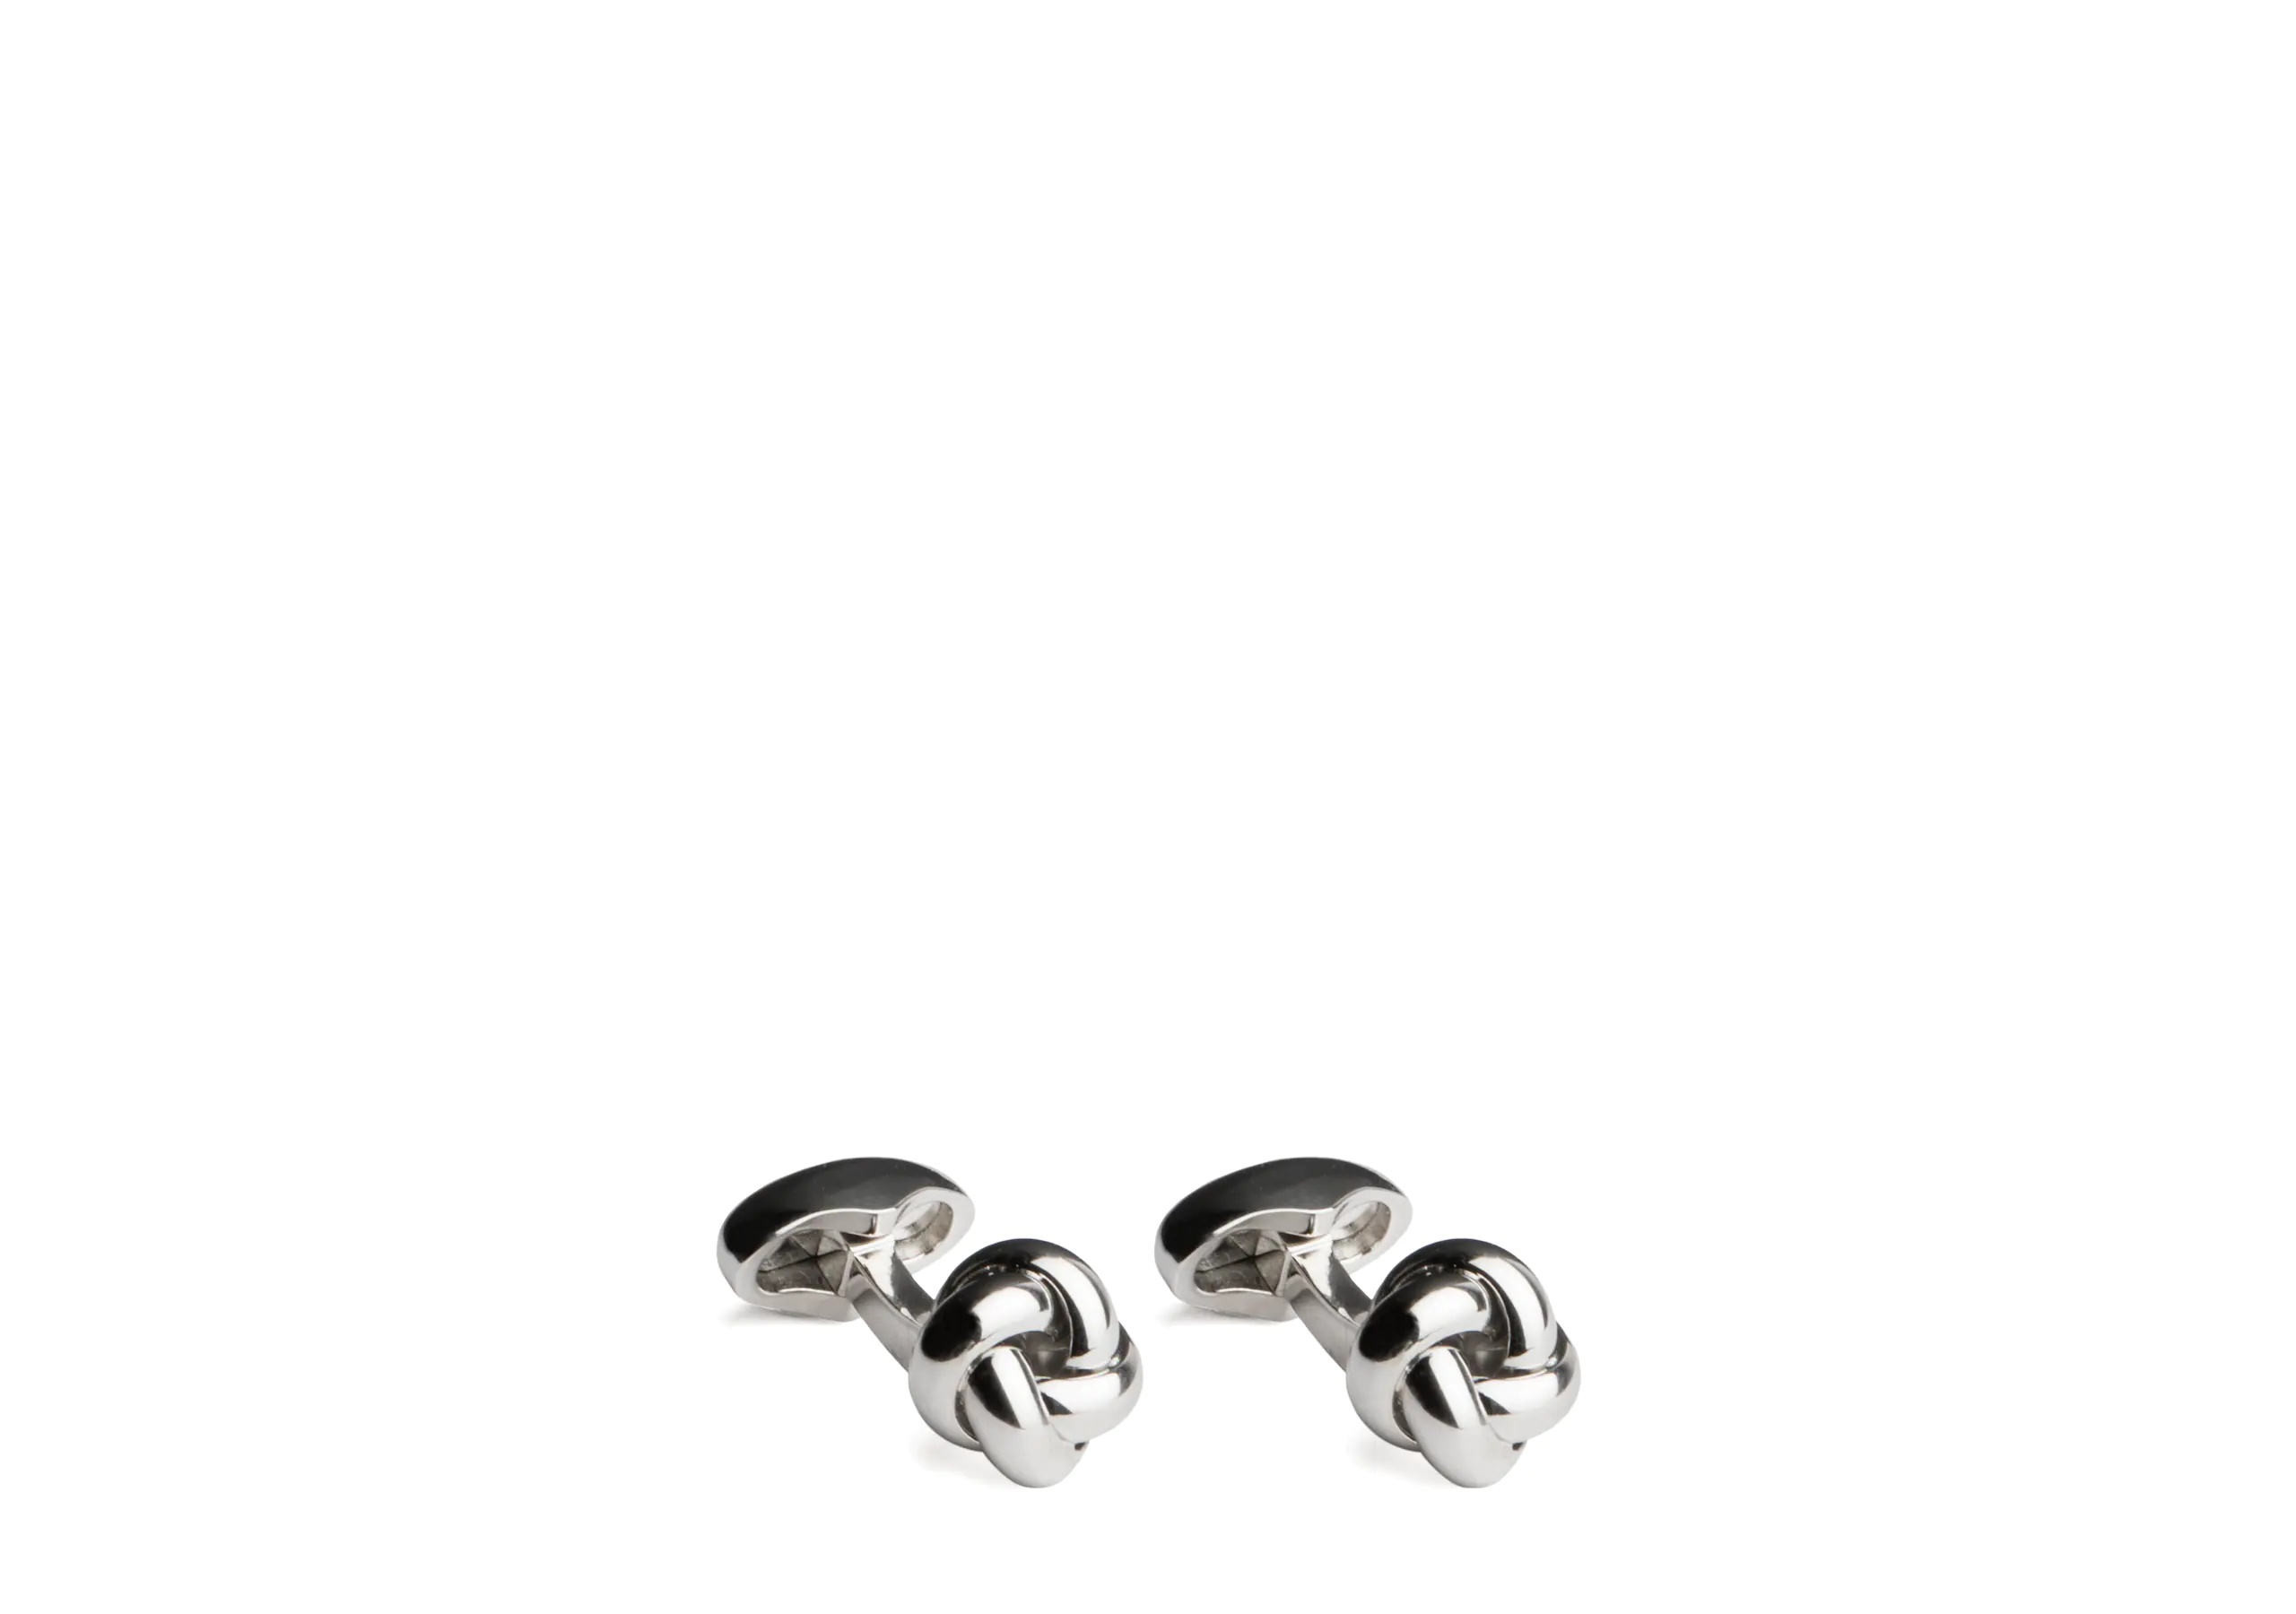 Knotted cufflink
Rhodium Plated Knot Silver - 1